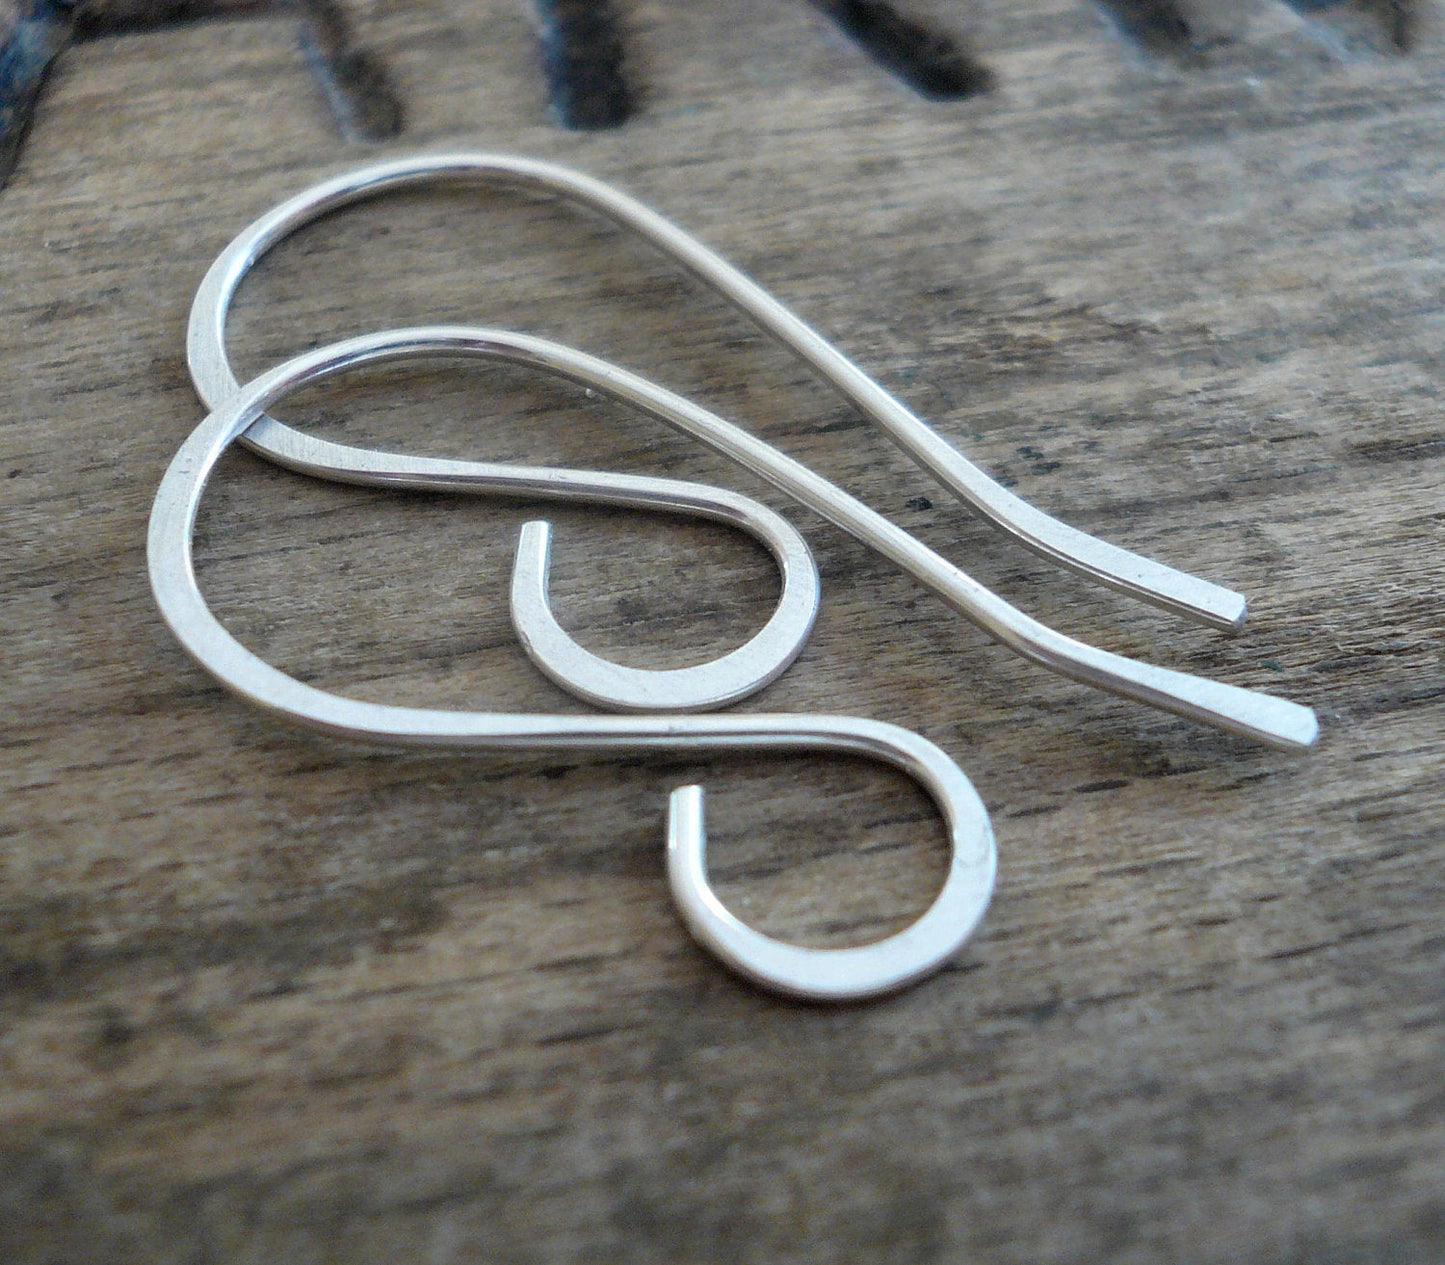 12 Pairs of my Large Loop Solitaire Sterling Silver or 14kt Goldfill Earwires - Handmade. Handforged